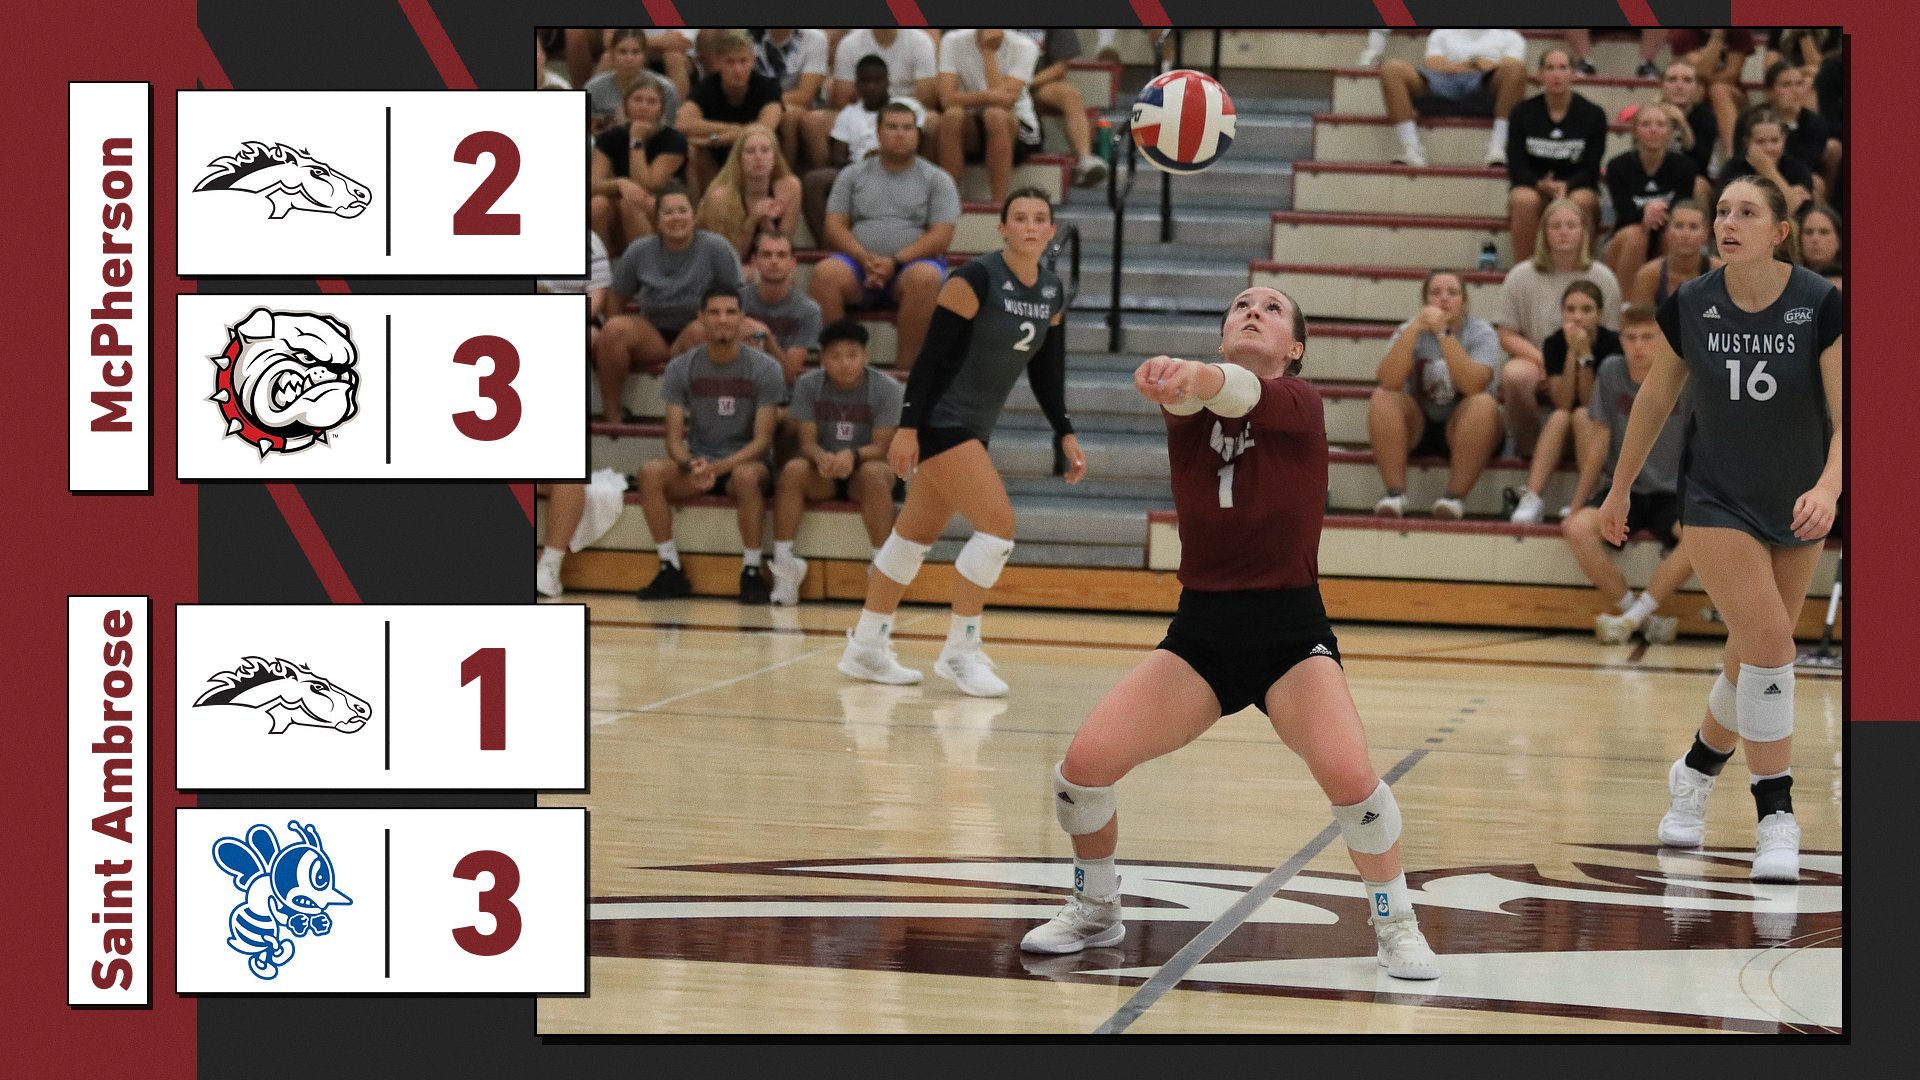 Mustangs drop pair in Park finale, losing to McPherson 3-2 and St. Ambrose 3-1